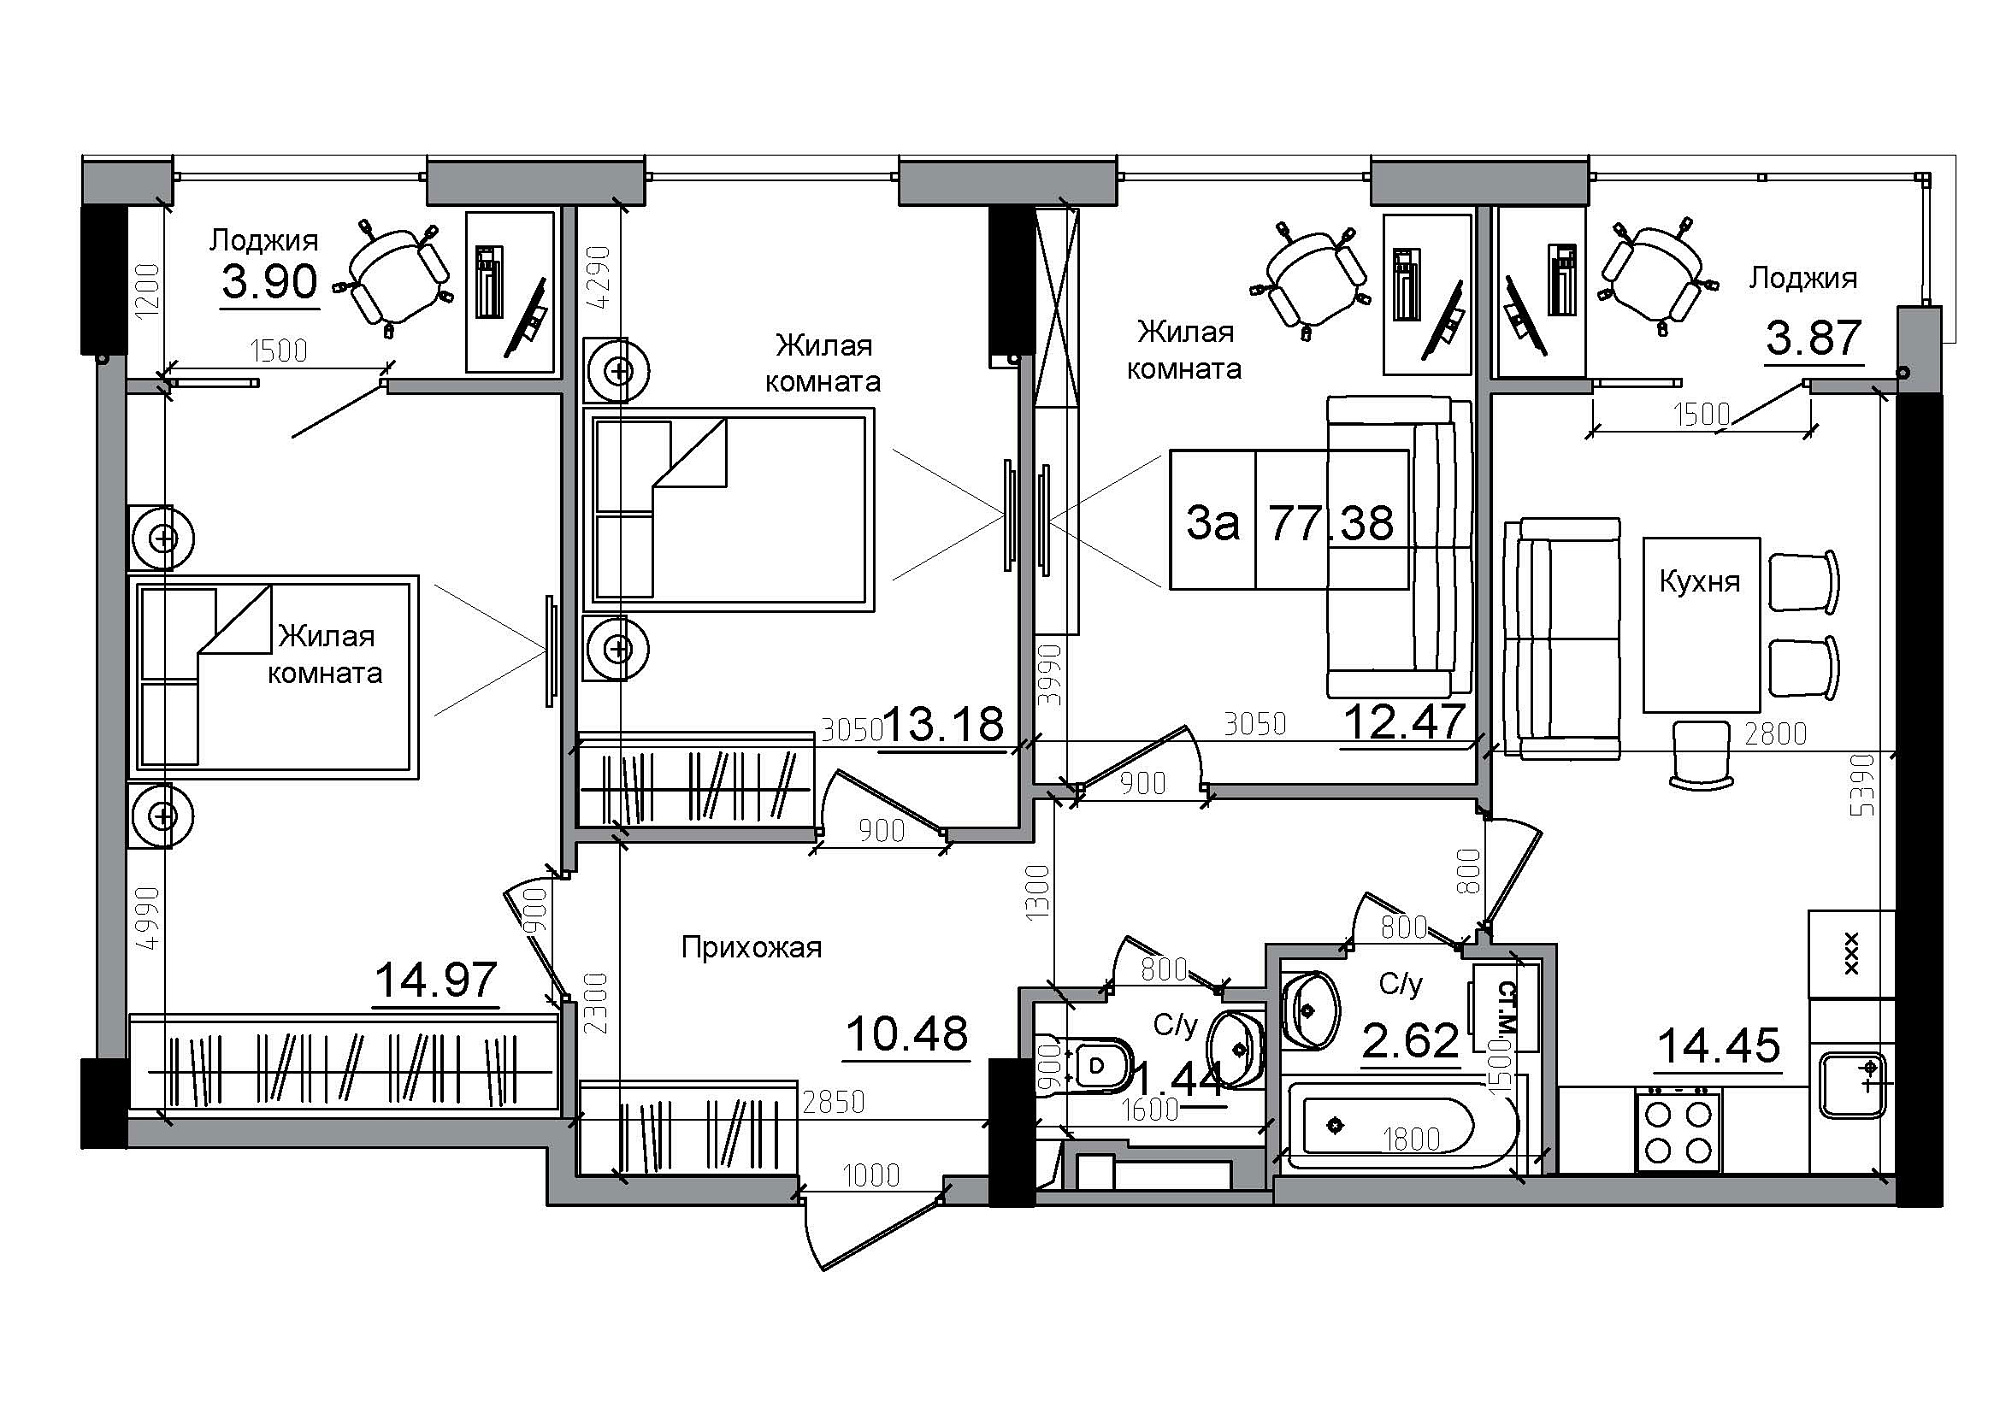 Planning 3-rm flats area 77.38m2, AB-12-02/00010.